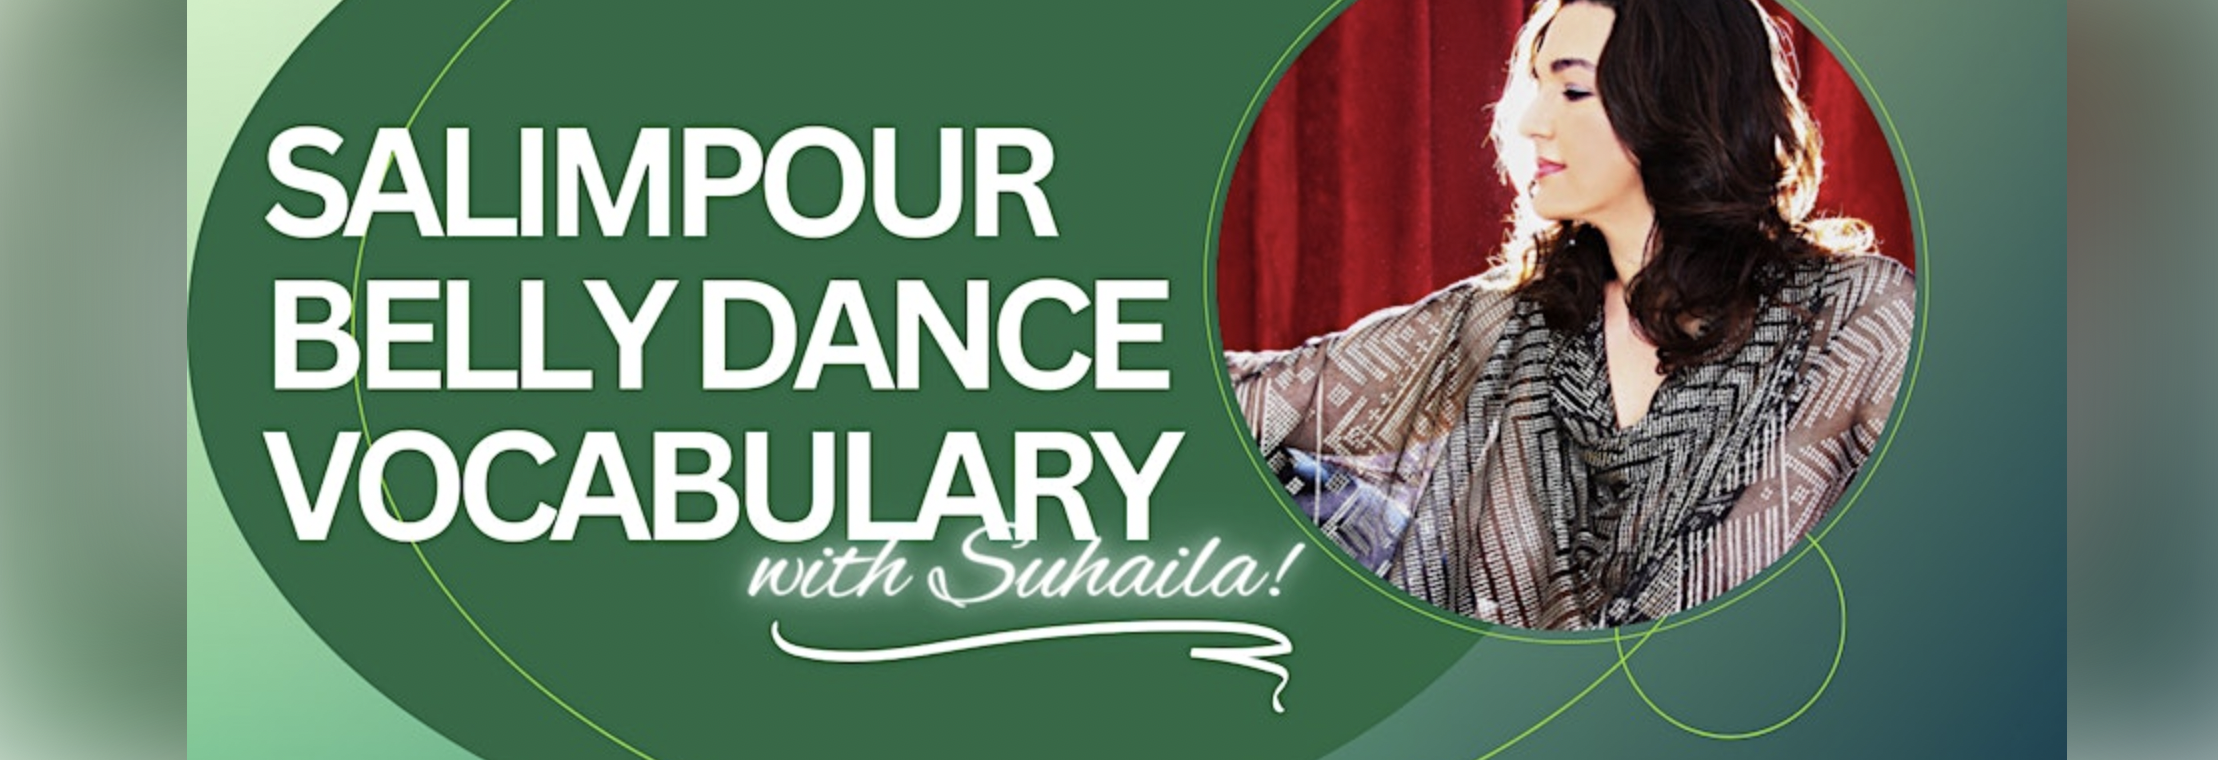 Salimpour Belly Dance Vocabulary with Suhaila!